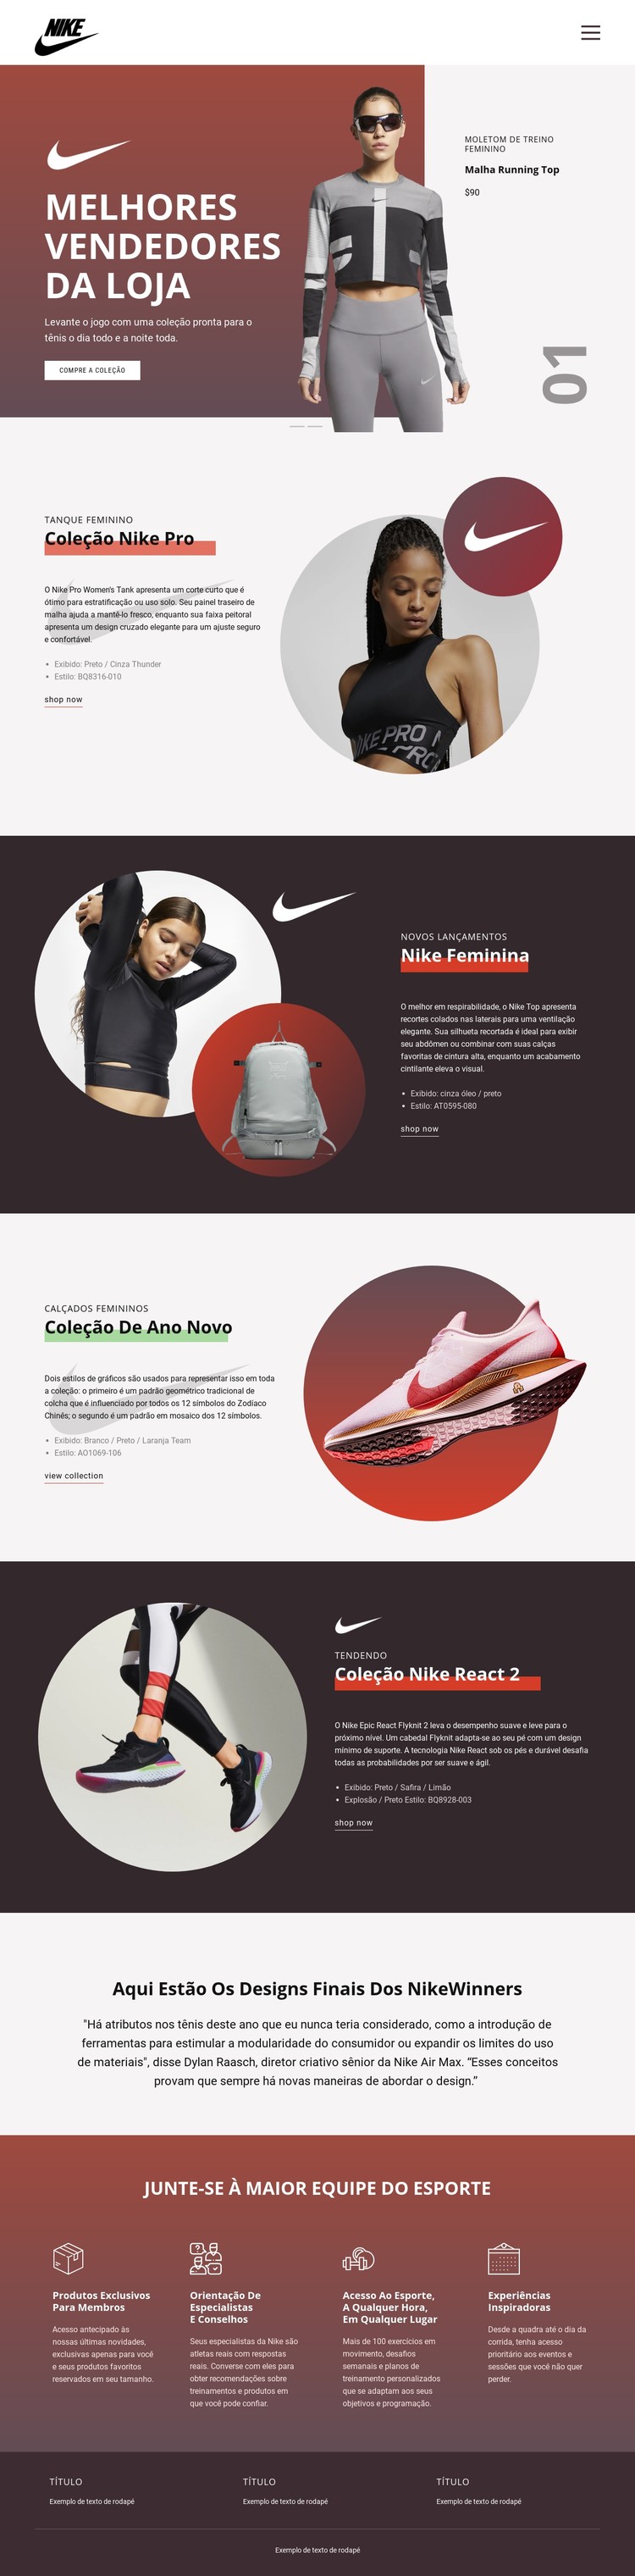 Best-sellers para esportes Template CSS